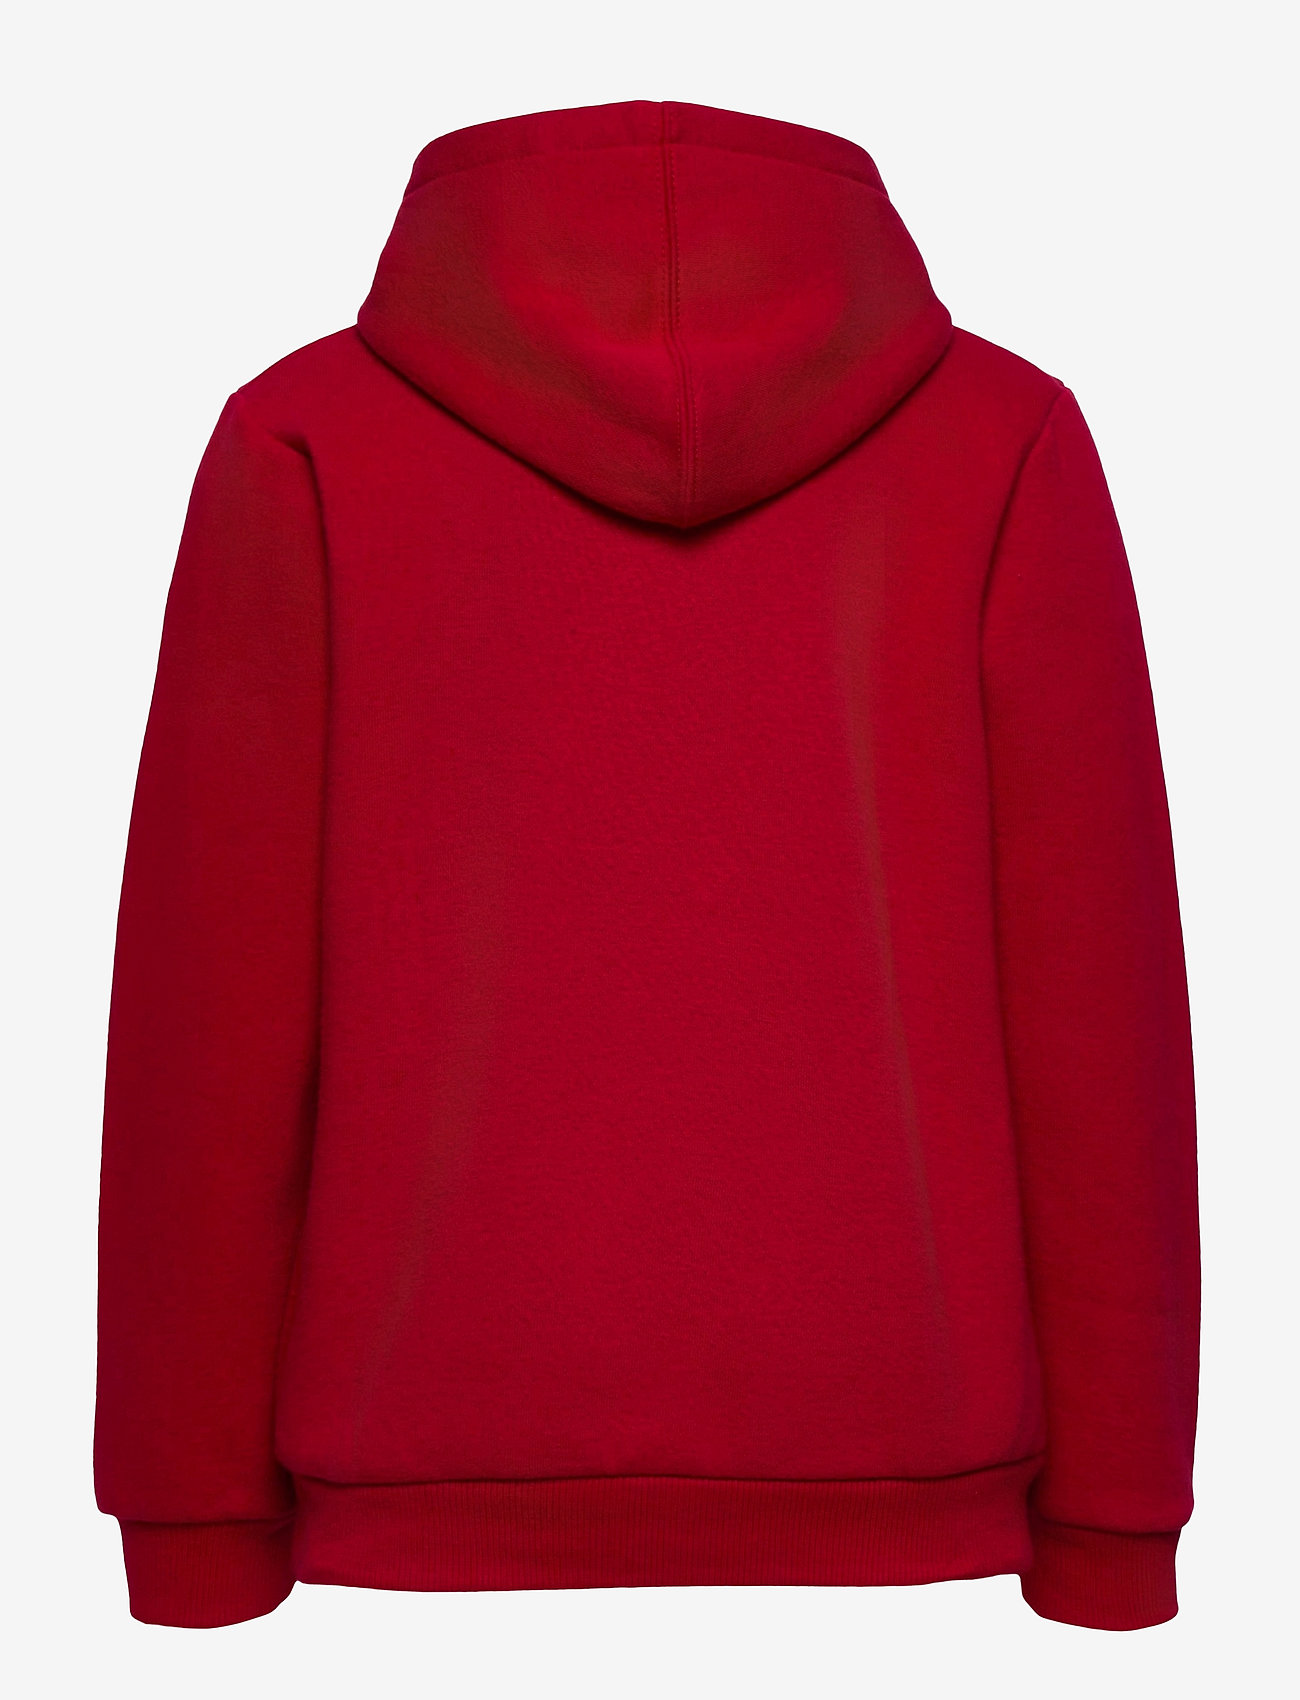 Levi's - Levi's® Batwing Screenprint Hooded Pullover - hoodies - levis red/ white - 1